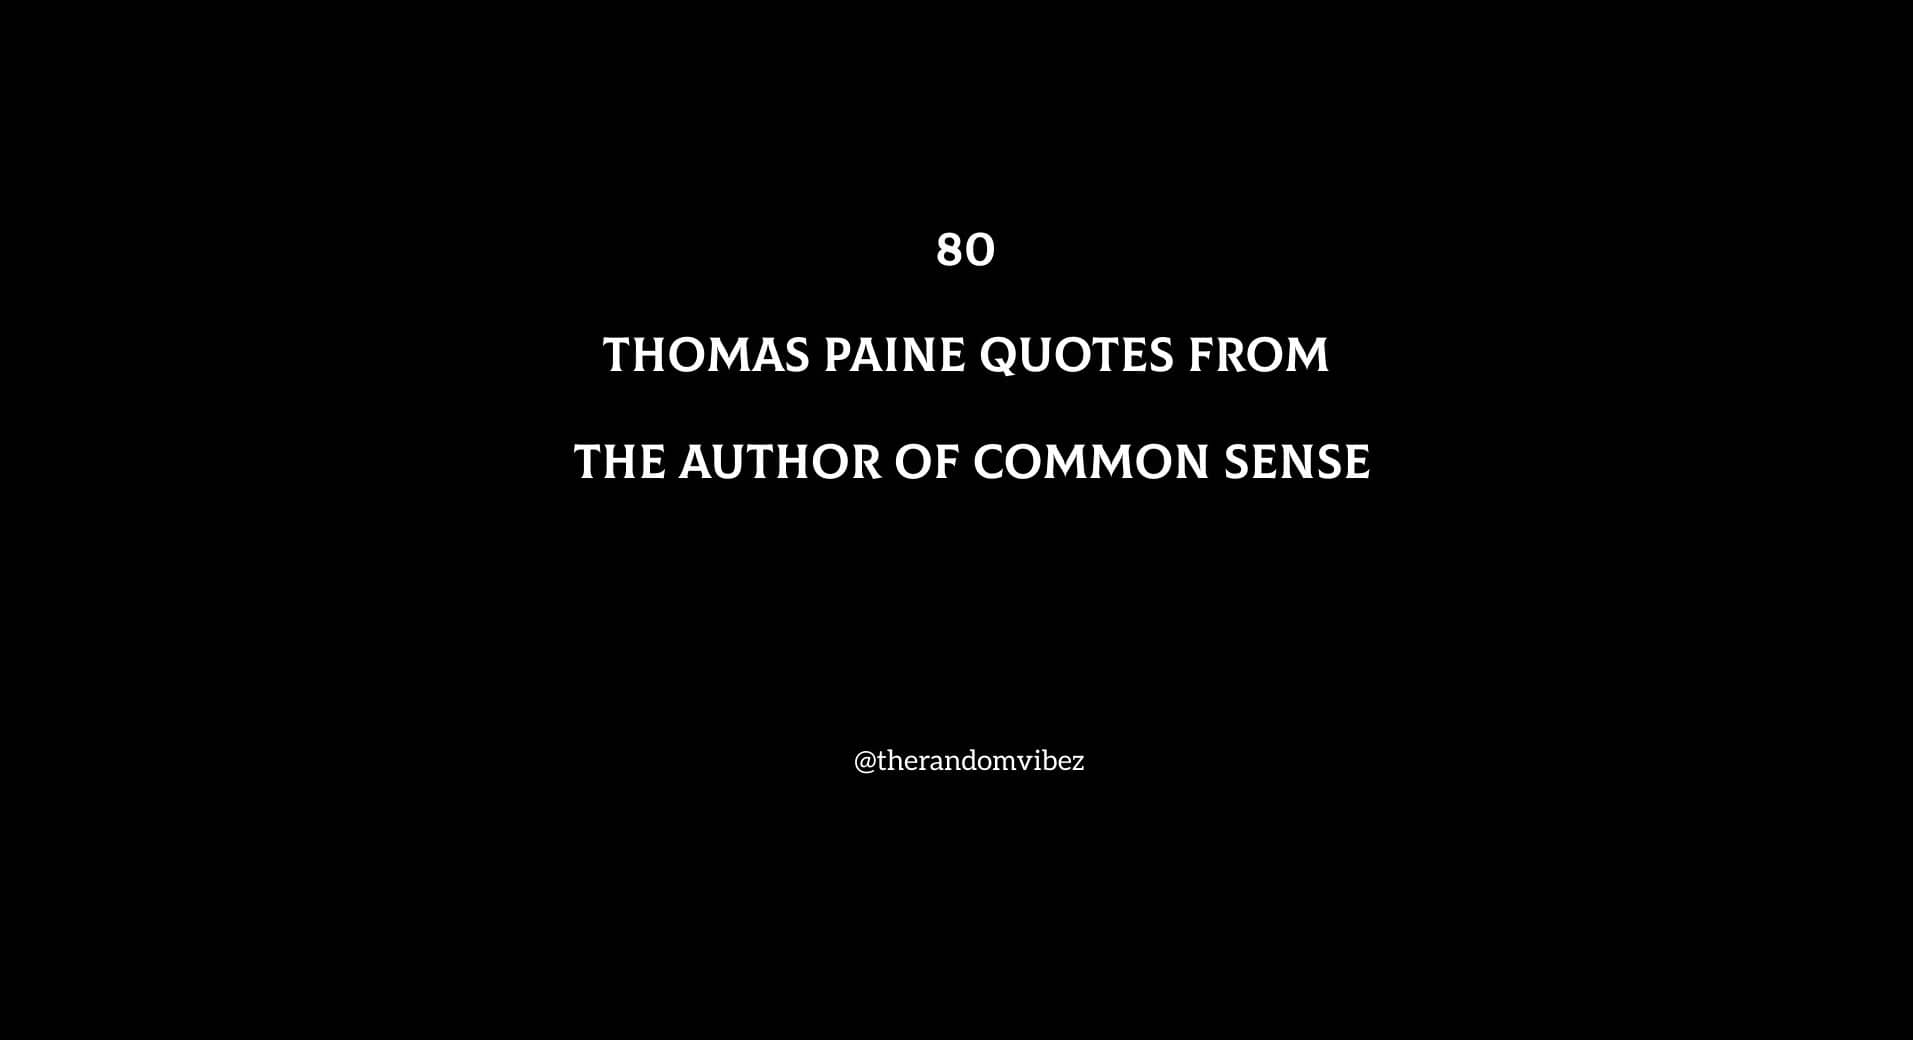 80 Thomas Paine Quotes From The Author of Common Sense